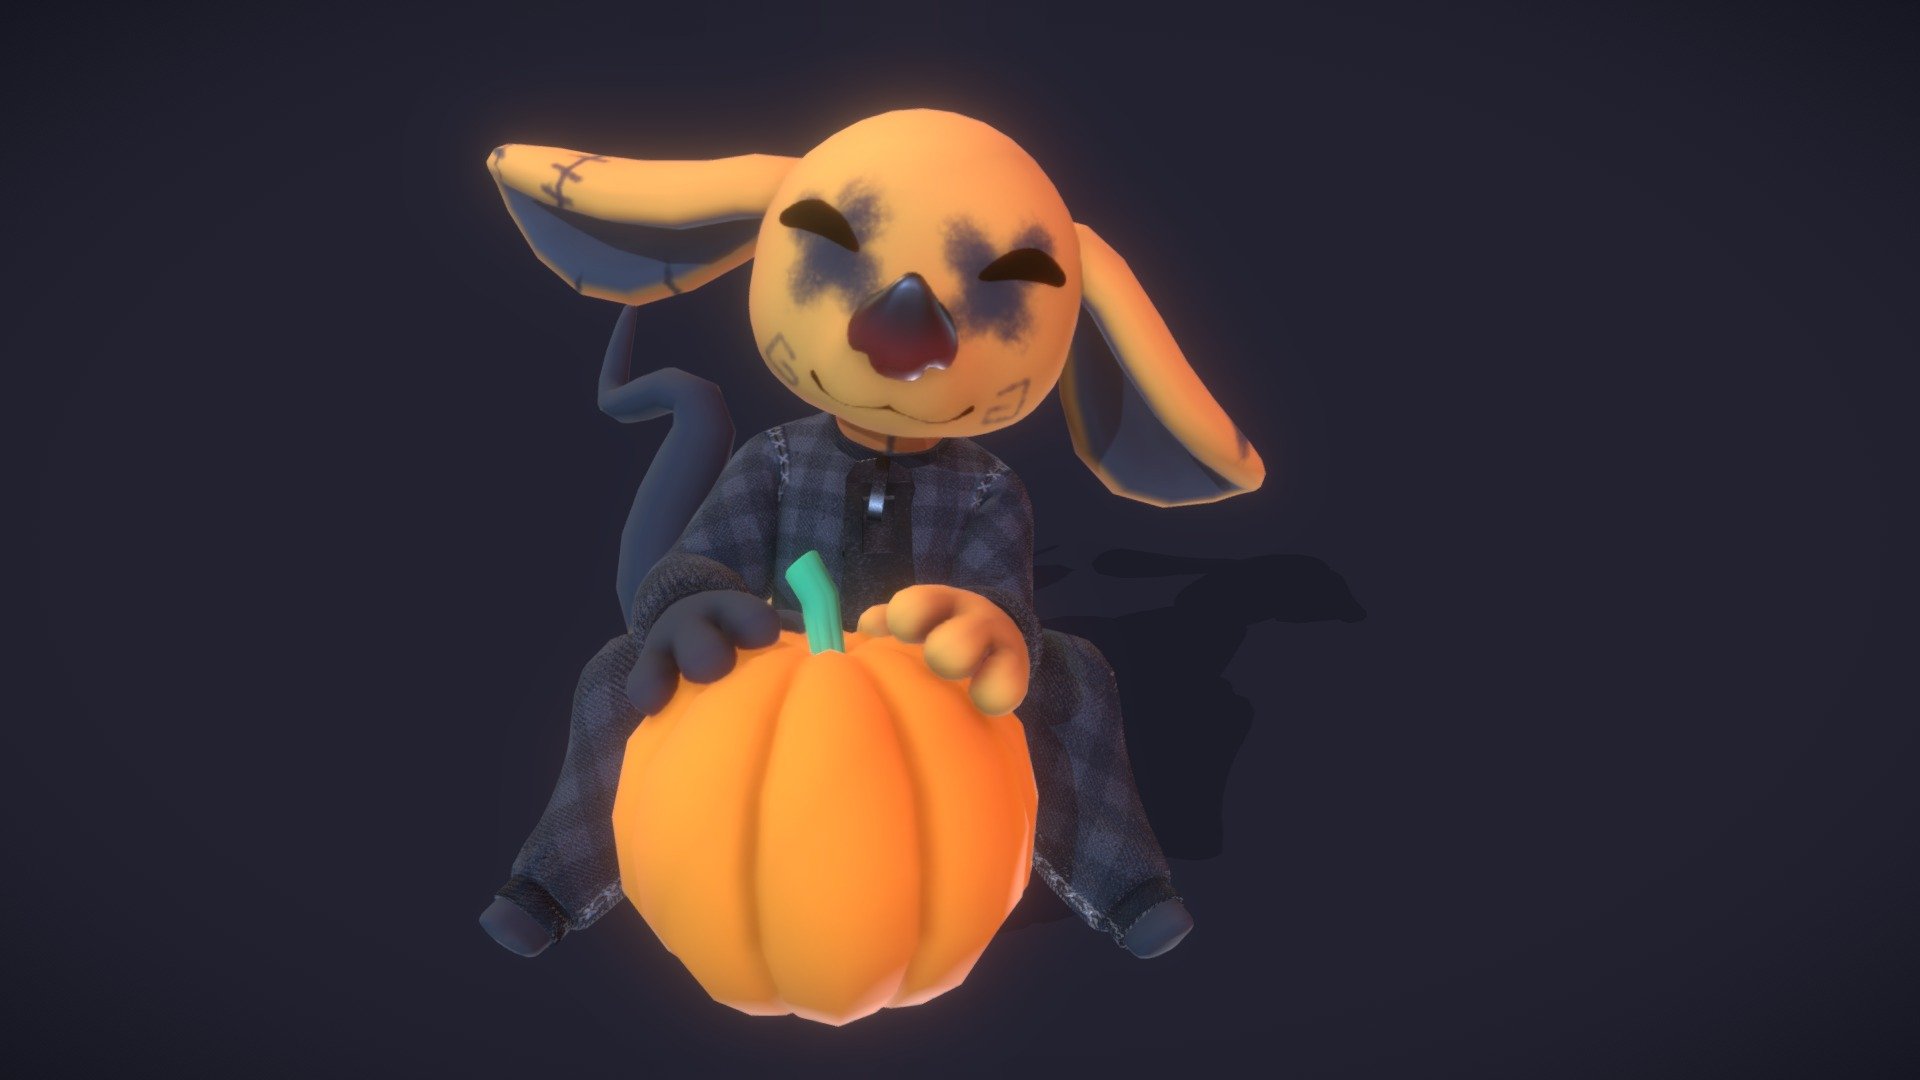 This halloween freebie can be donwloaded below. It is also available on gumroad under lvlisolyth.

https://drive.google.com/file/d/1FP11zmcslBBho2u3kvqaQE3lP7vDErpb/view?usp=sharing - Halloweenie - 3D model by SMÖL (@SM0L) 3d model